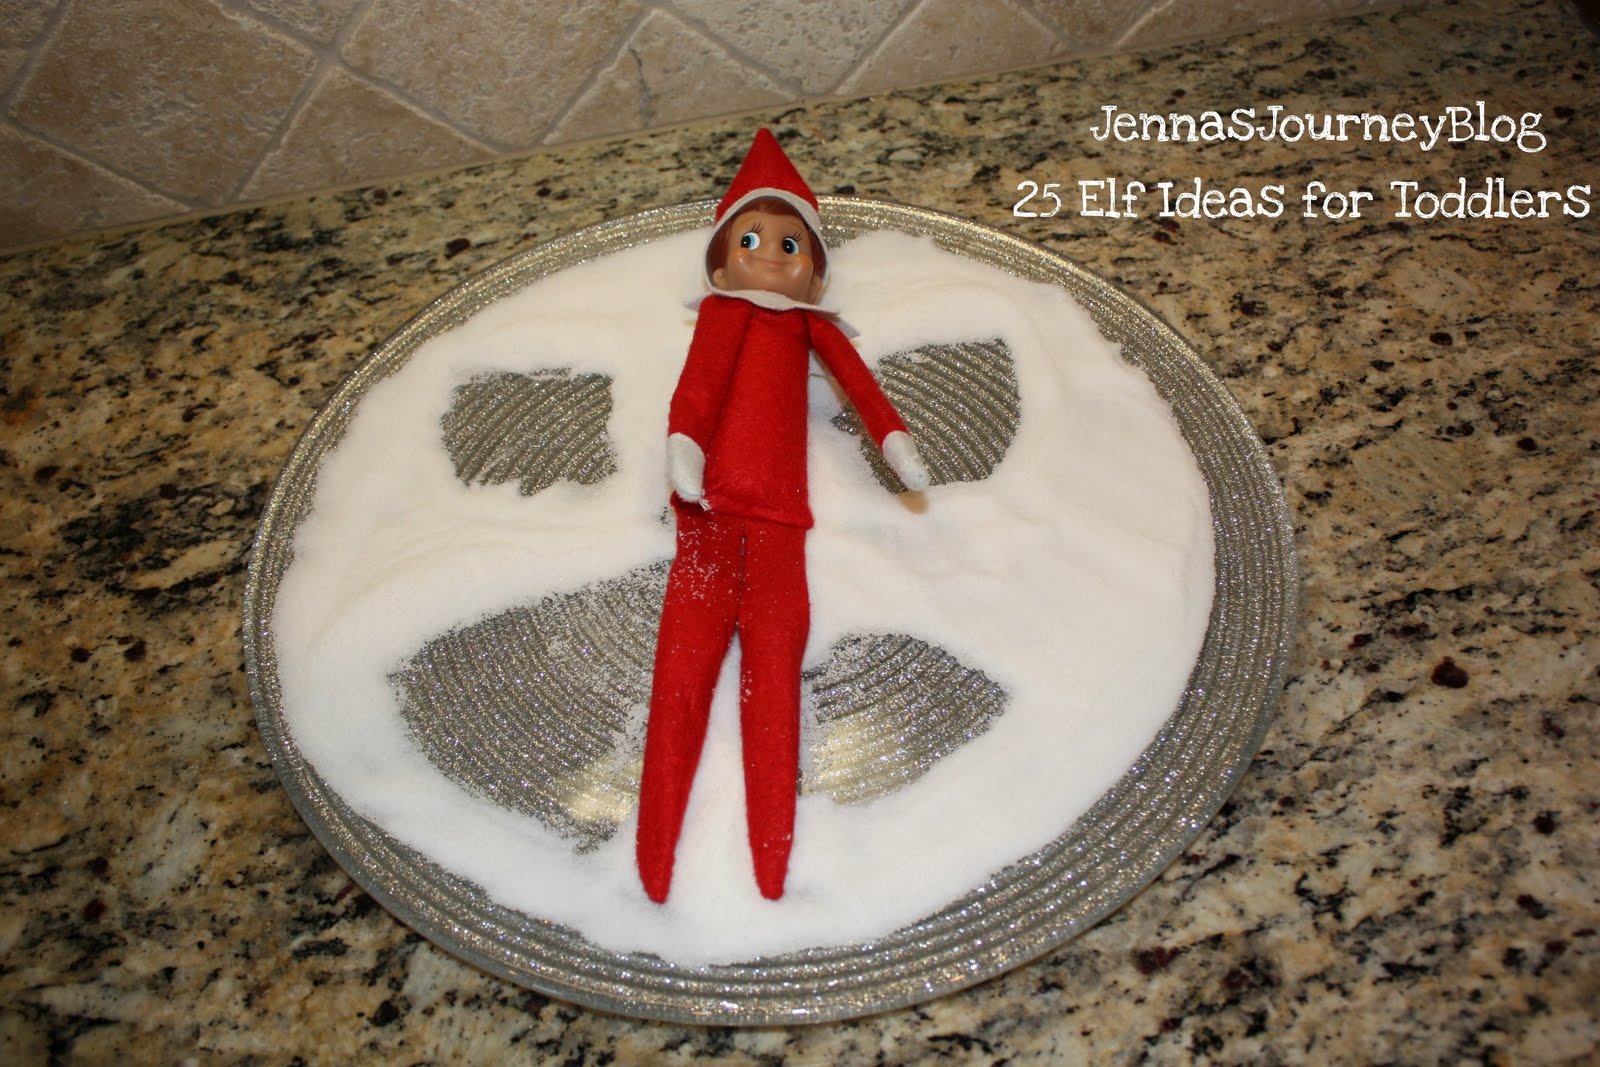 jenna-blogs-25-elf-on-the-shelf-ideas-for-toddlers